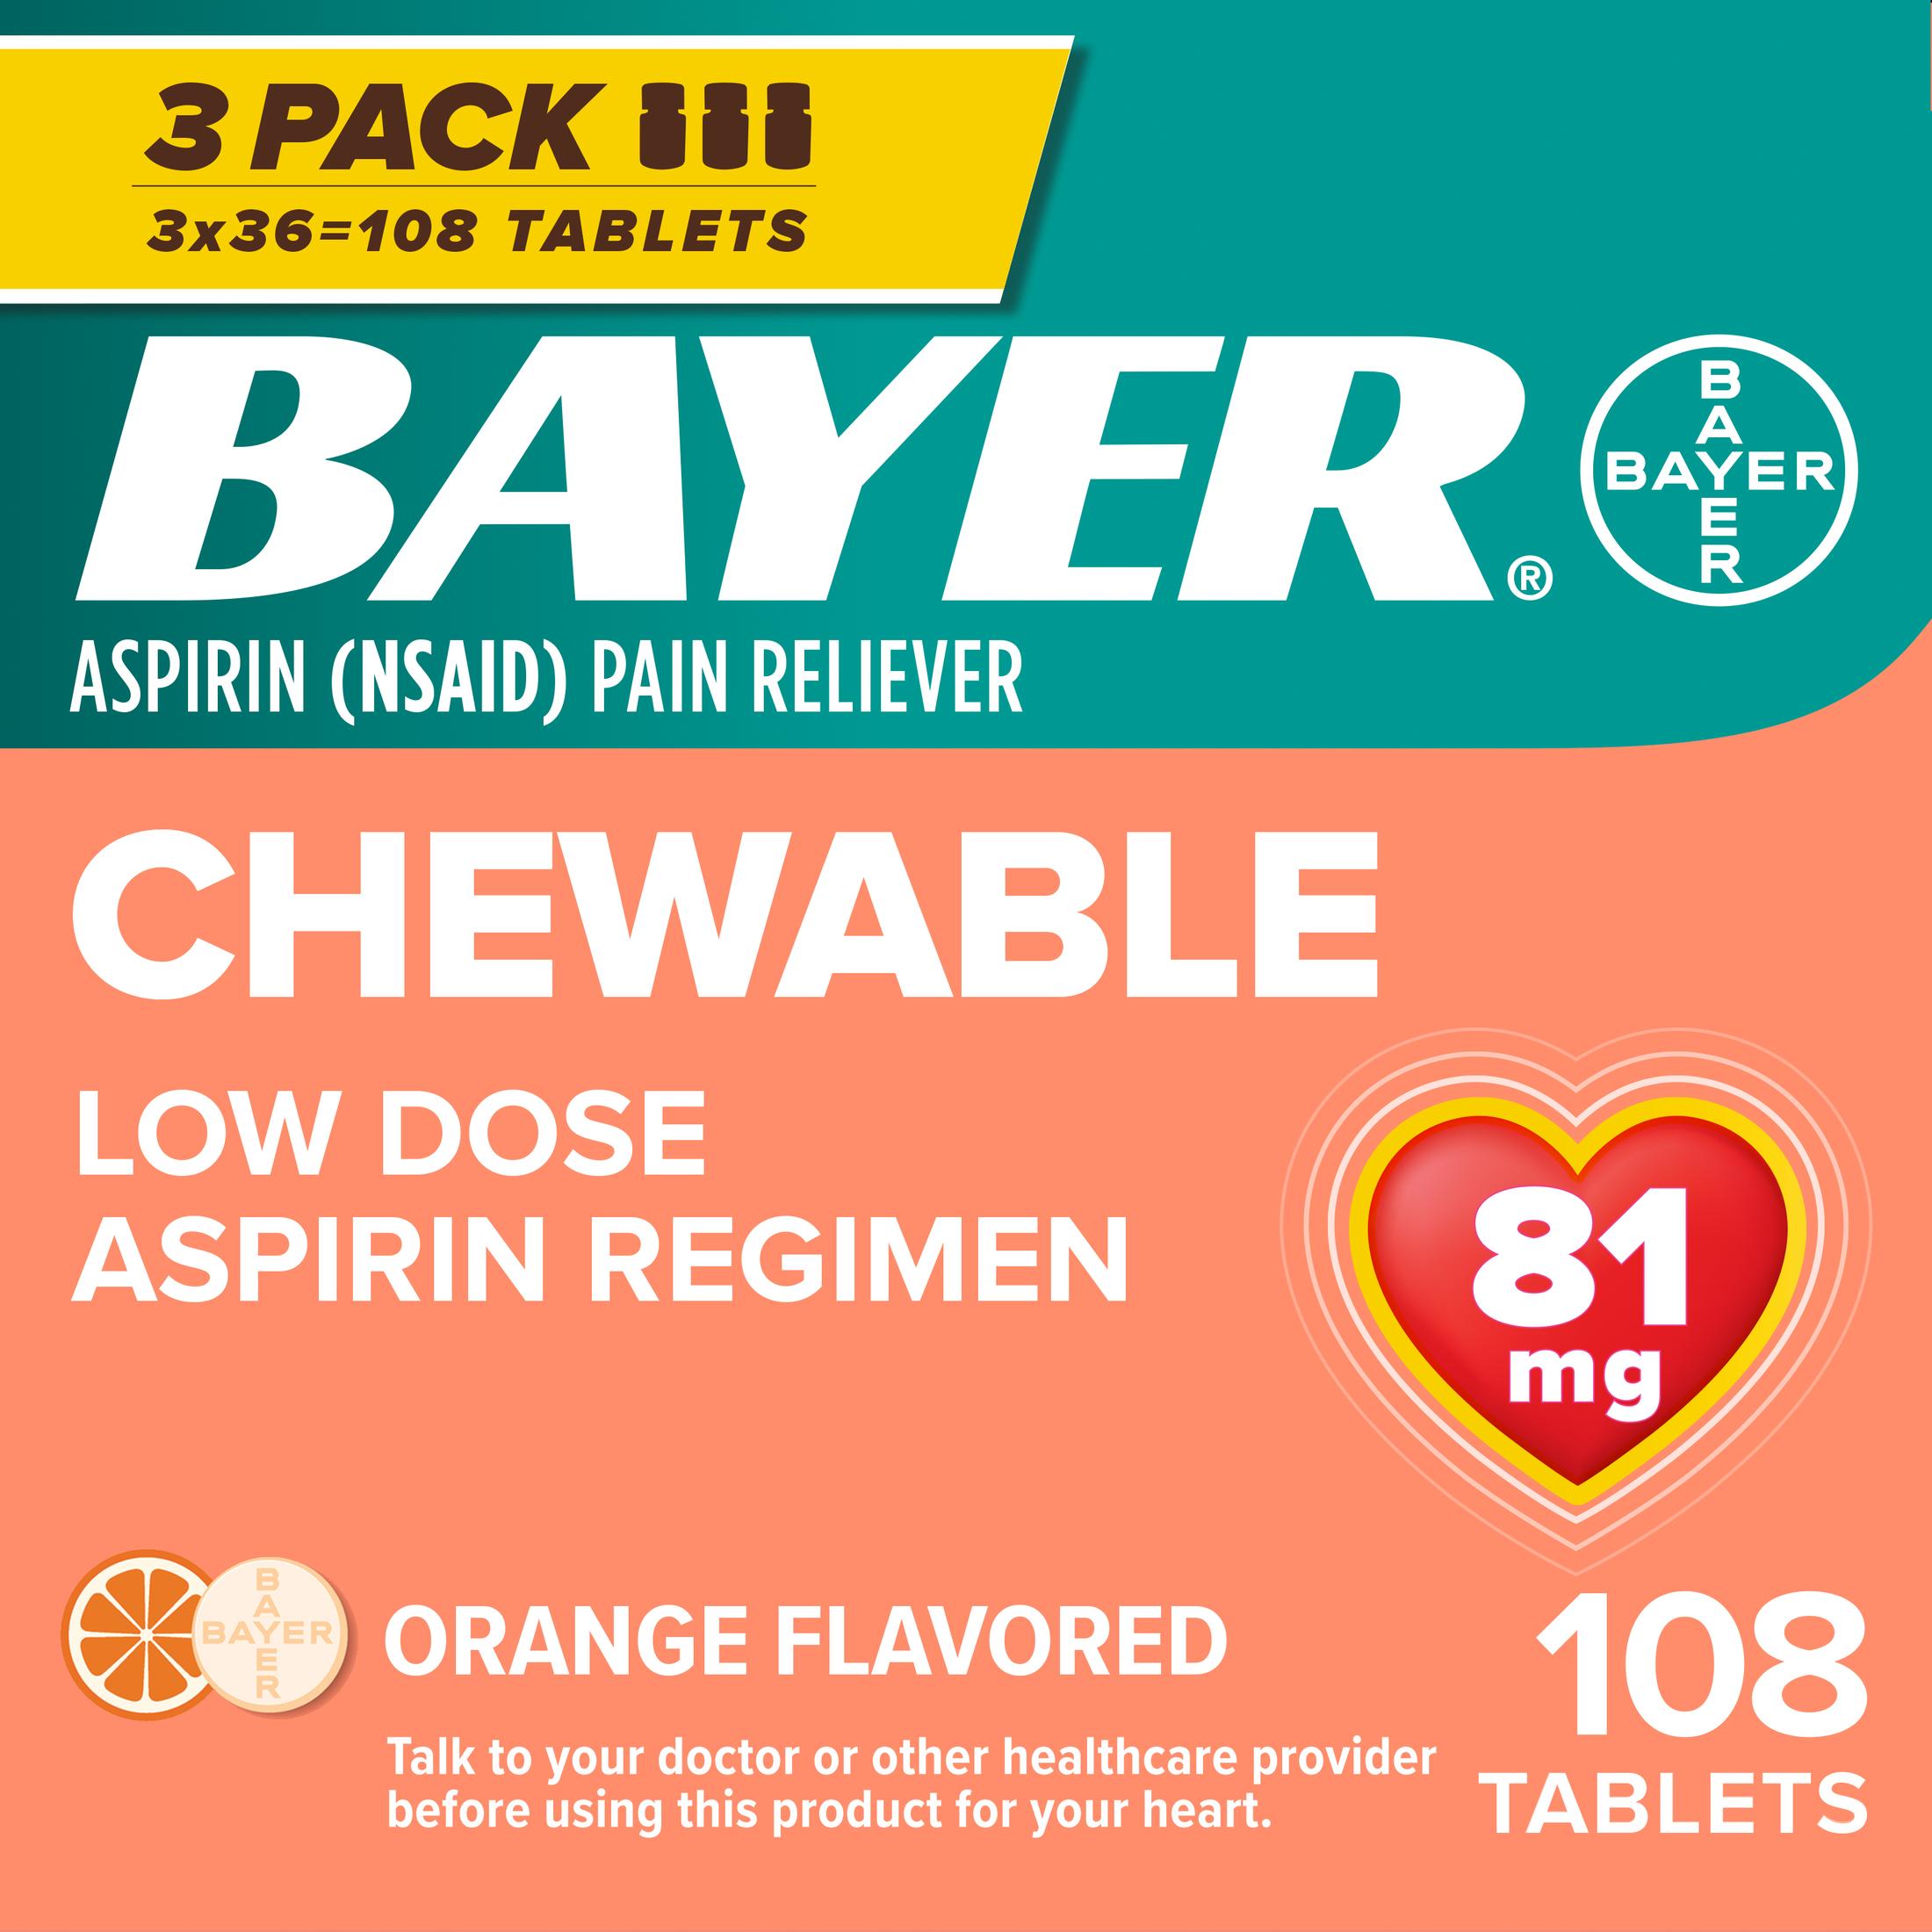 Bayer Chewable Aspirin Regimen Low Dose Pain Reliever Tablets, 81mg, Orange, 108 Count - image 1 of 2